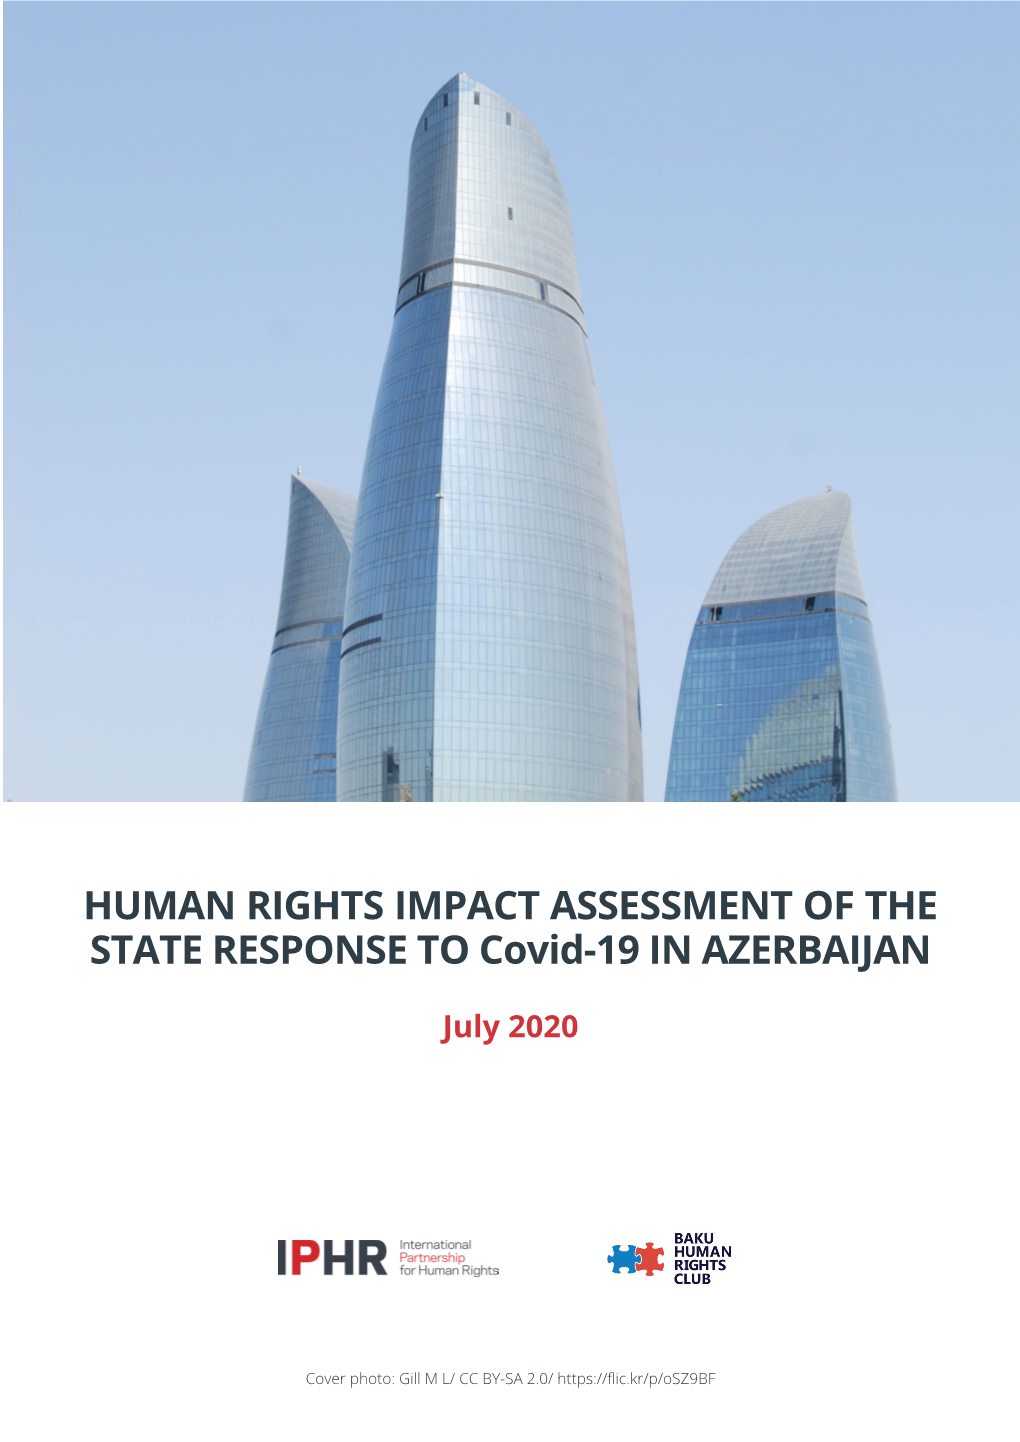 HUMAN RIGHTS IMPACT ASSESSMENT of the STATE RESPONSE to Covid-19 in AZERBAIJAN